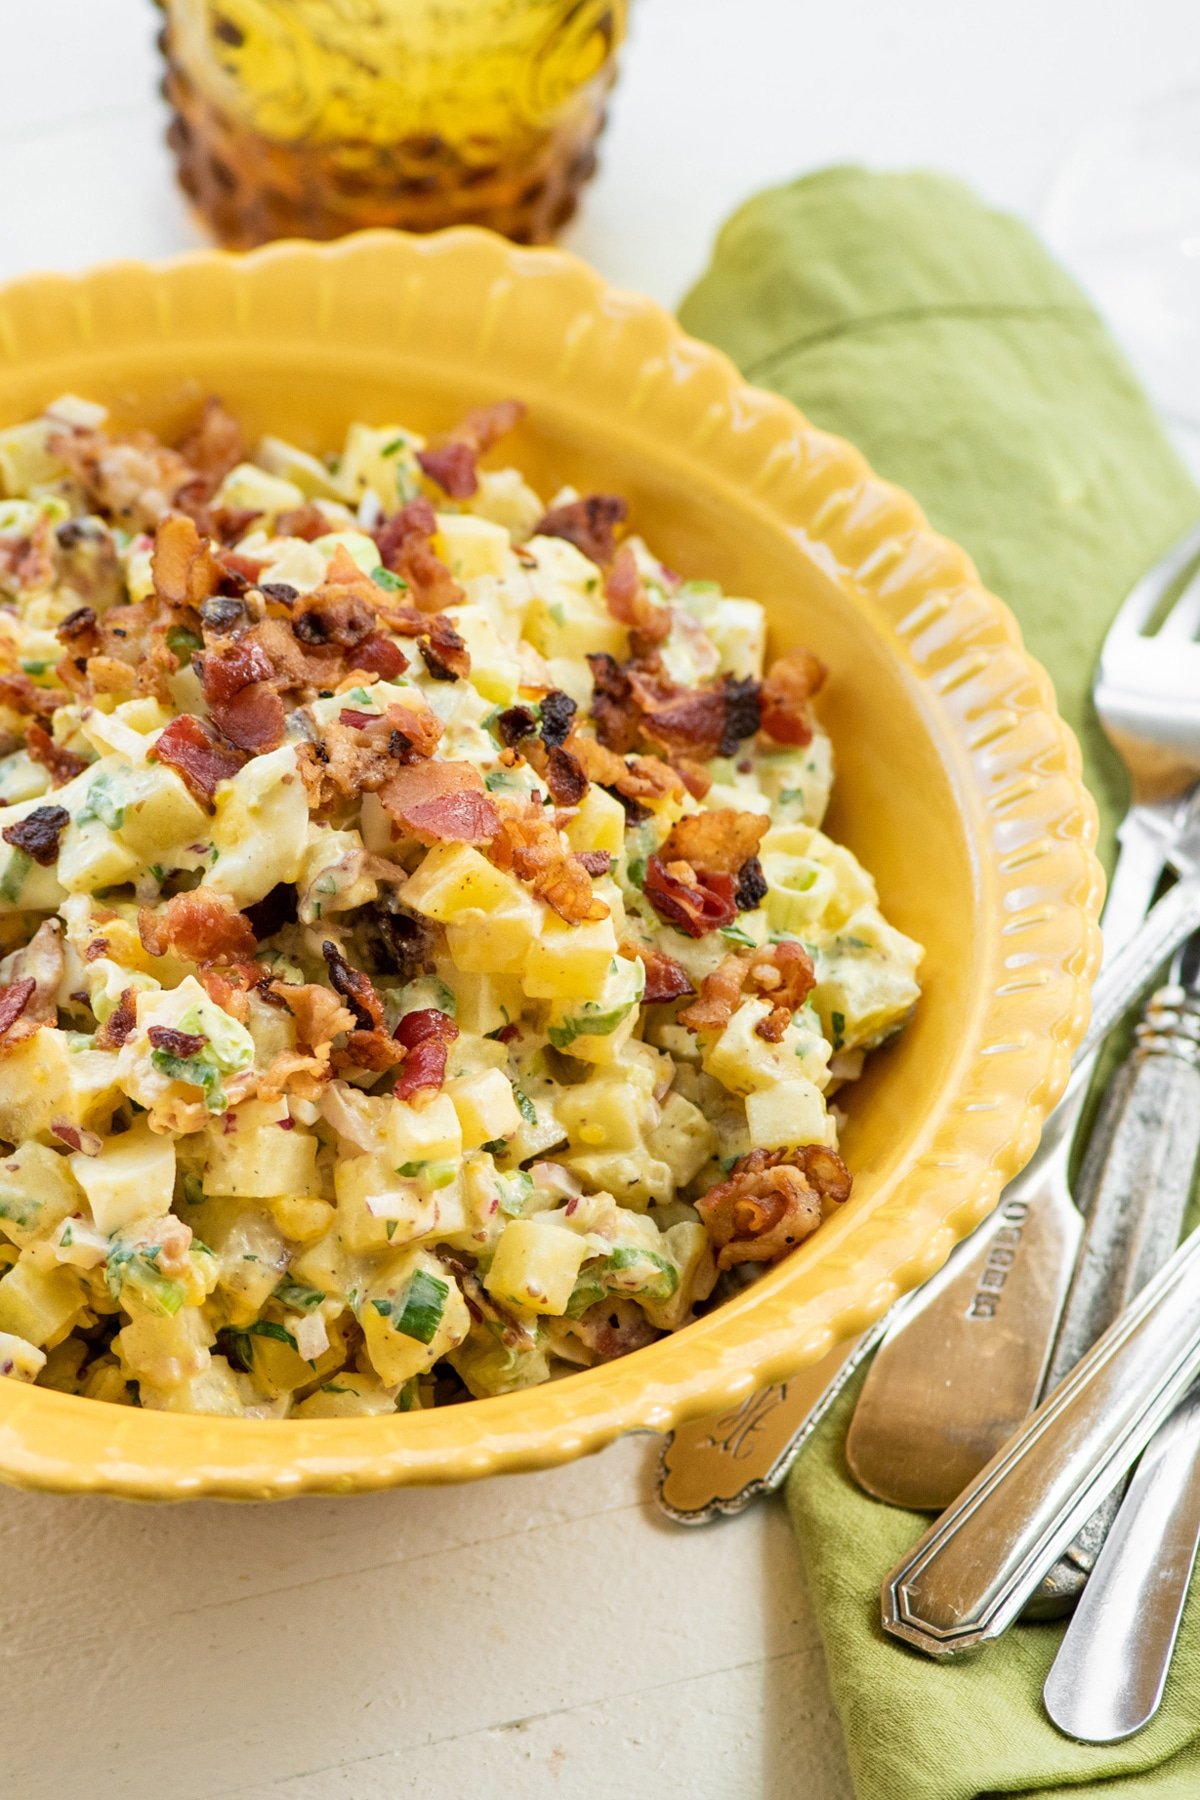 Egg and Potato Salad with Bacon piled high in a yellow bowl.